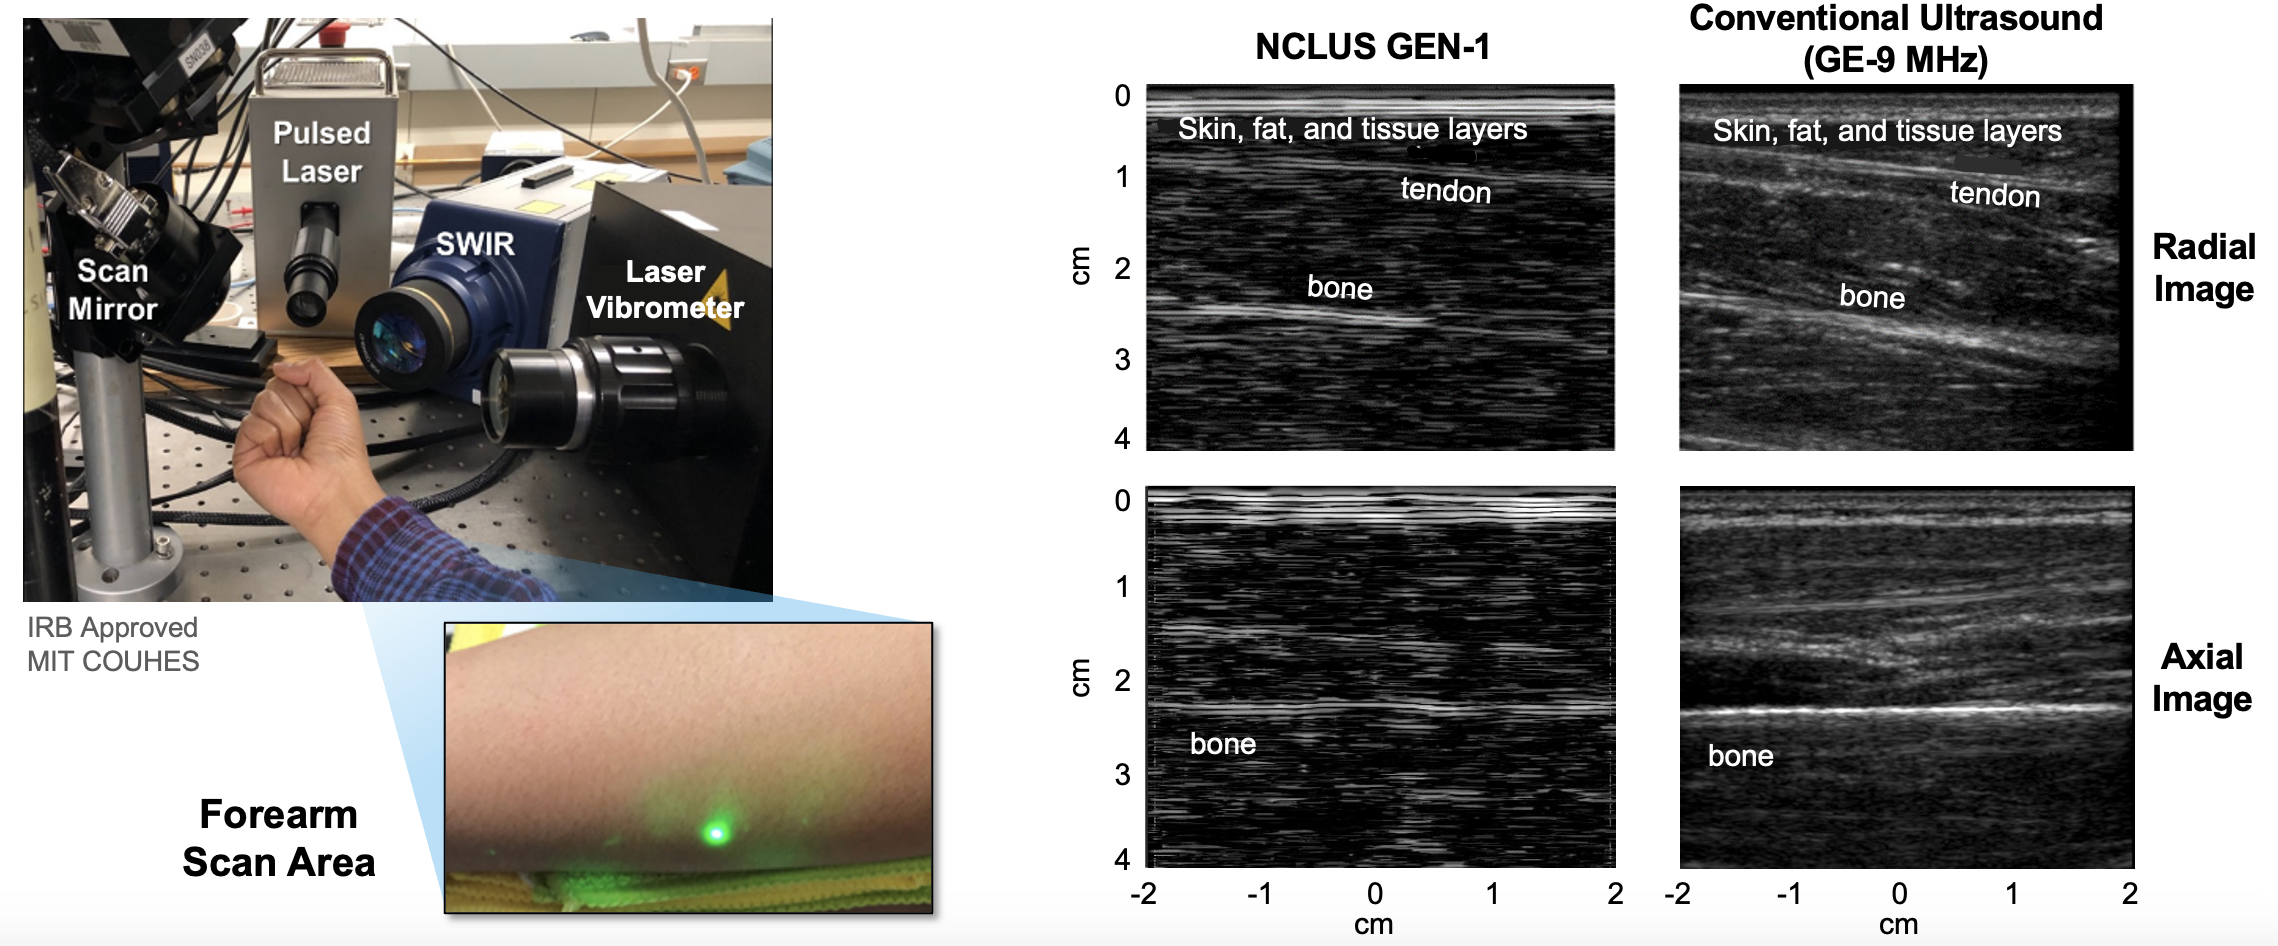 Three images show the Noncontact Laser Ultrasound first-generation system, a forearm scan area, and a comparison of system images to those of conventional ultrasound.